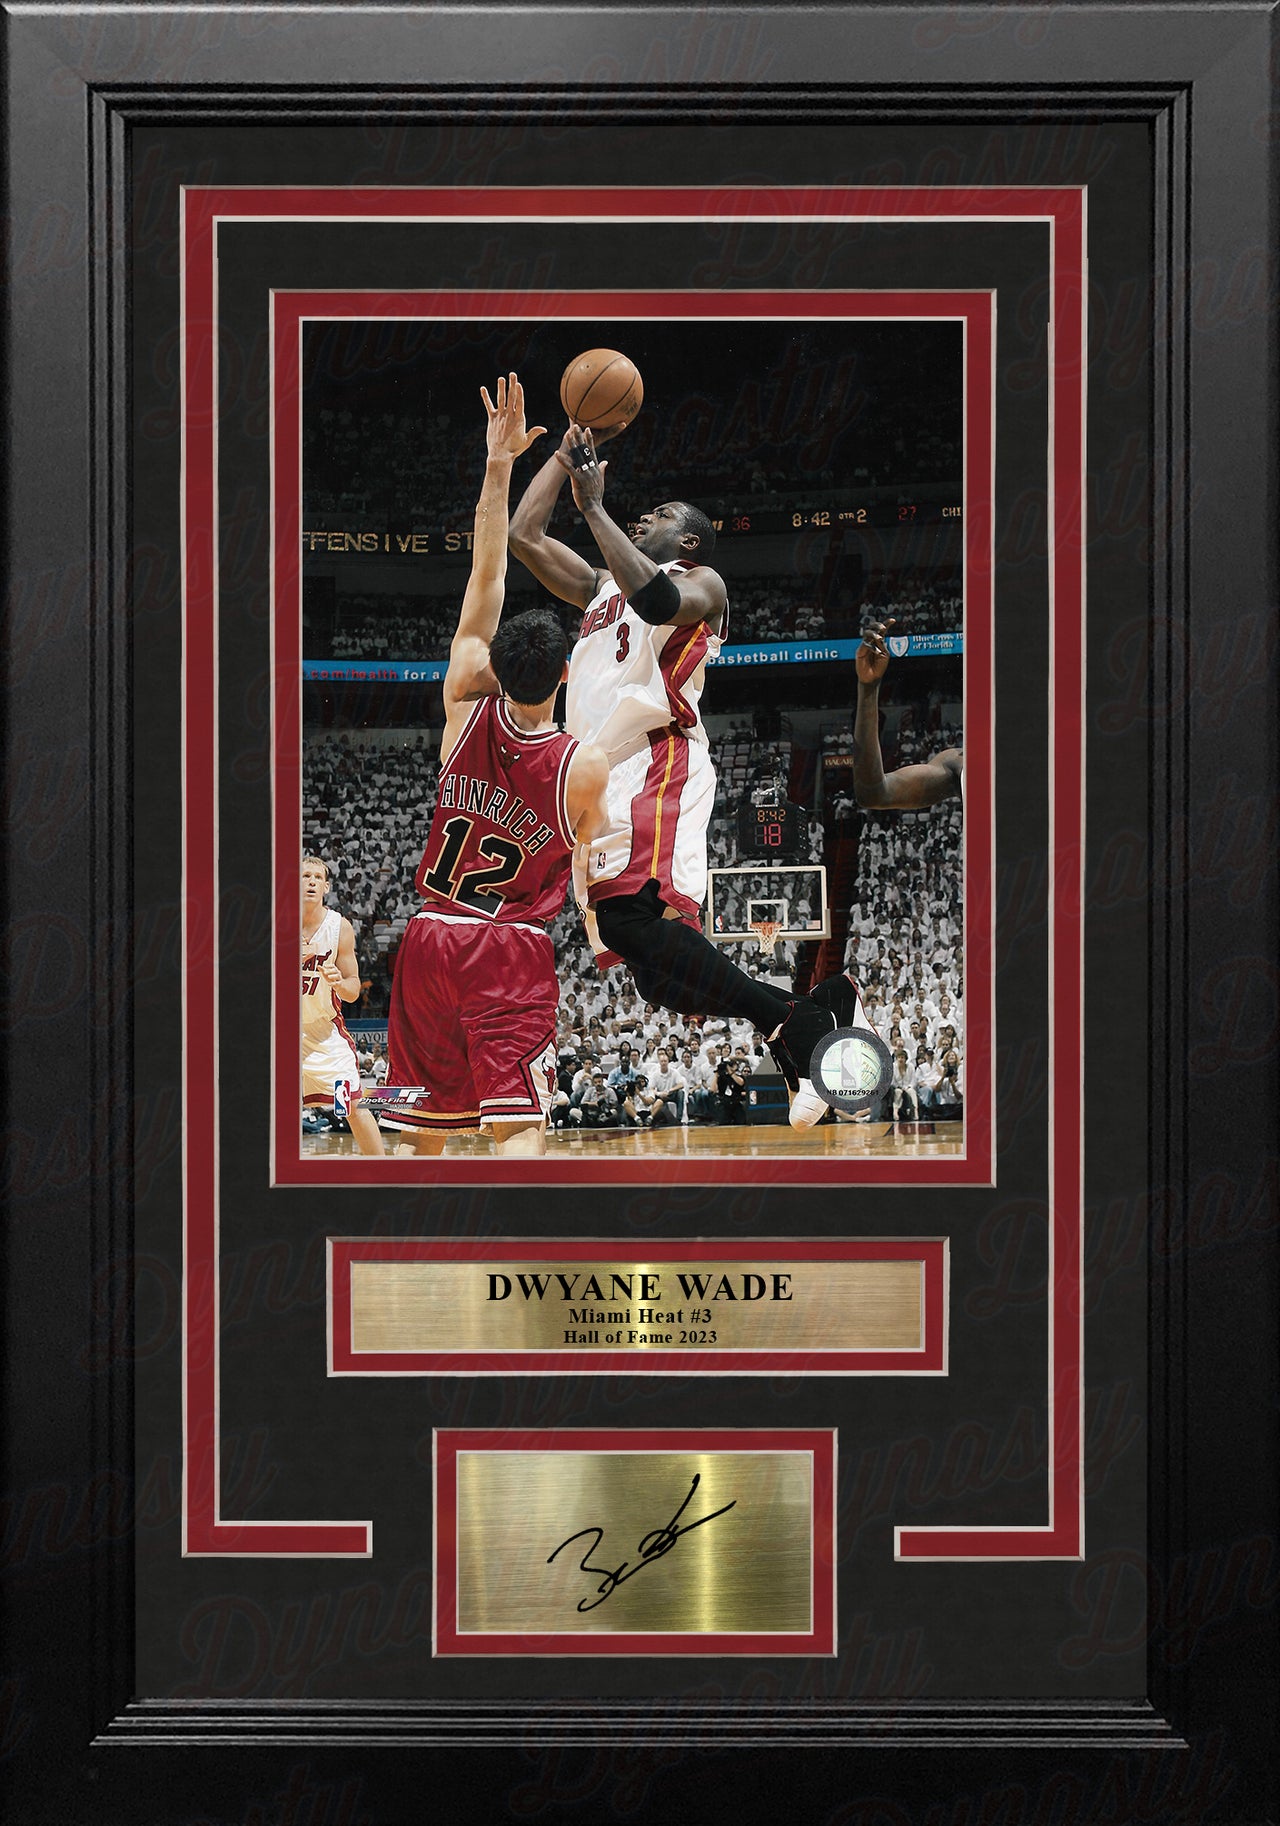 Dwyane Wade in Action Miami Heat 8" x 10" Framed Basketball Photo with Engraved Autograph - Dynasty Sports & Framing 